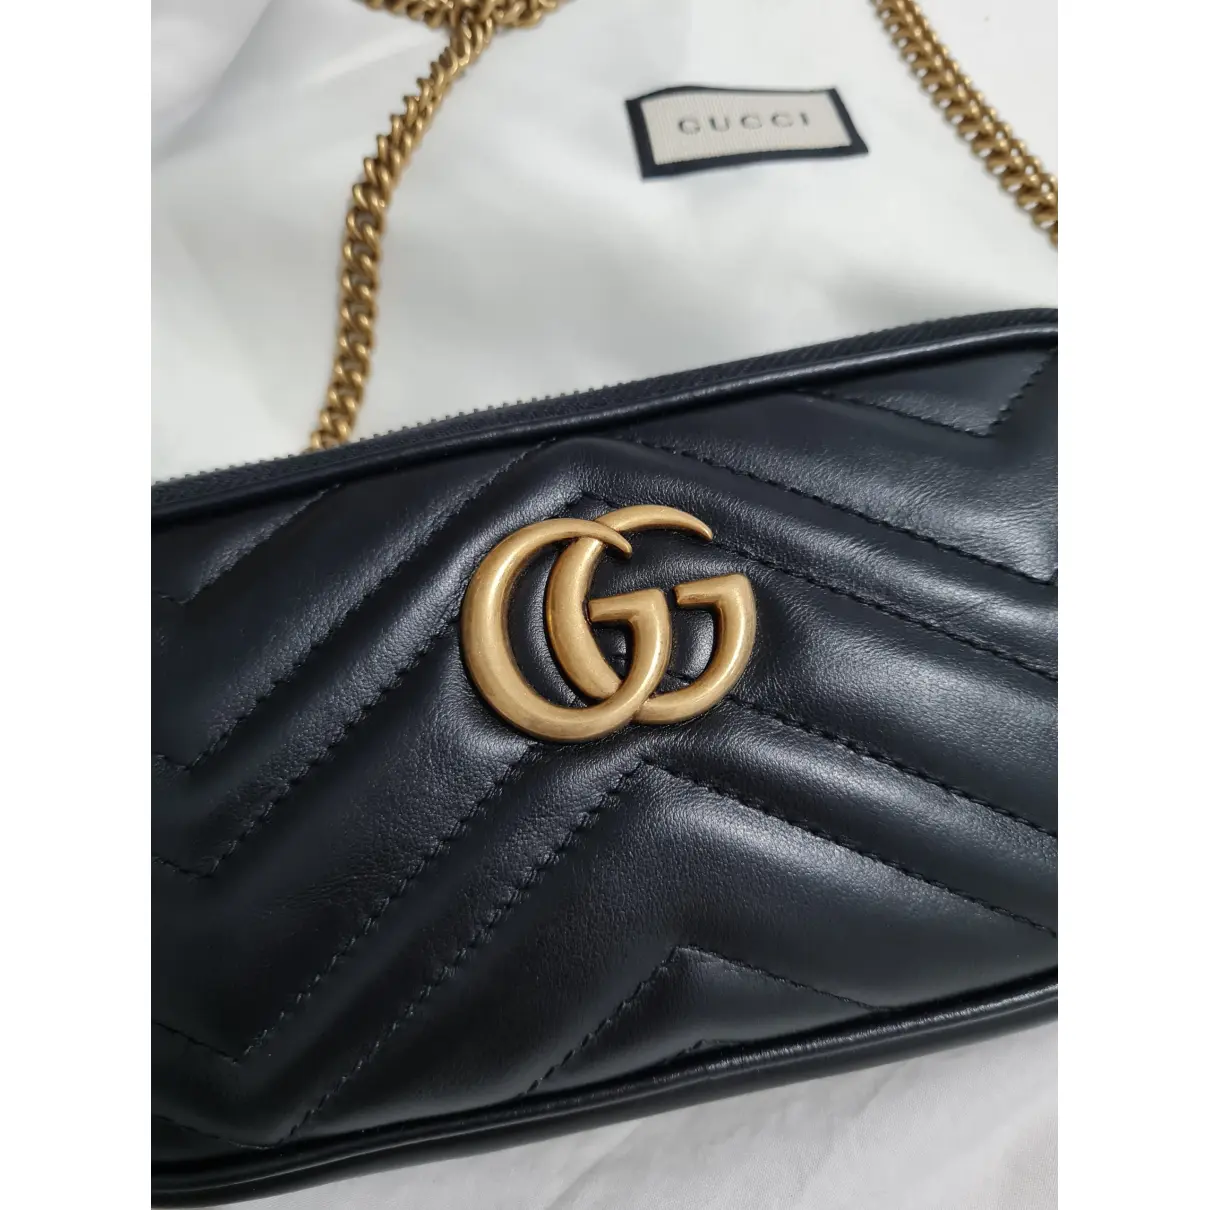 GG Marmont Triple zip leather crossbody bag Gucci